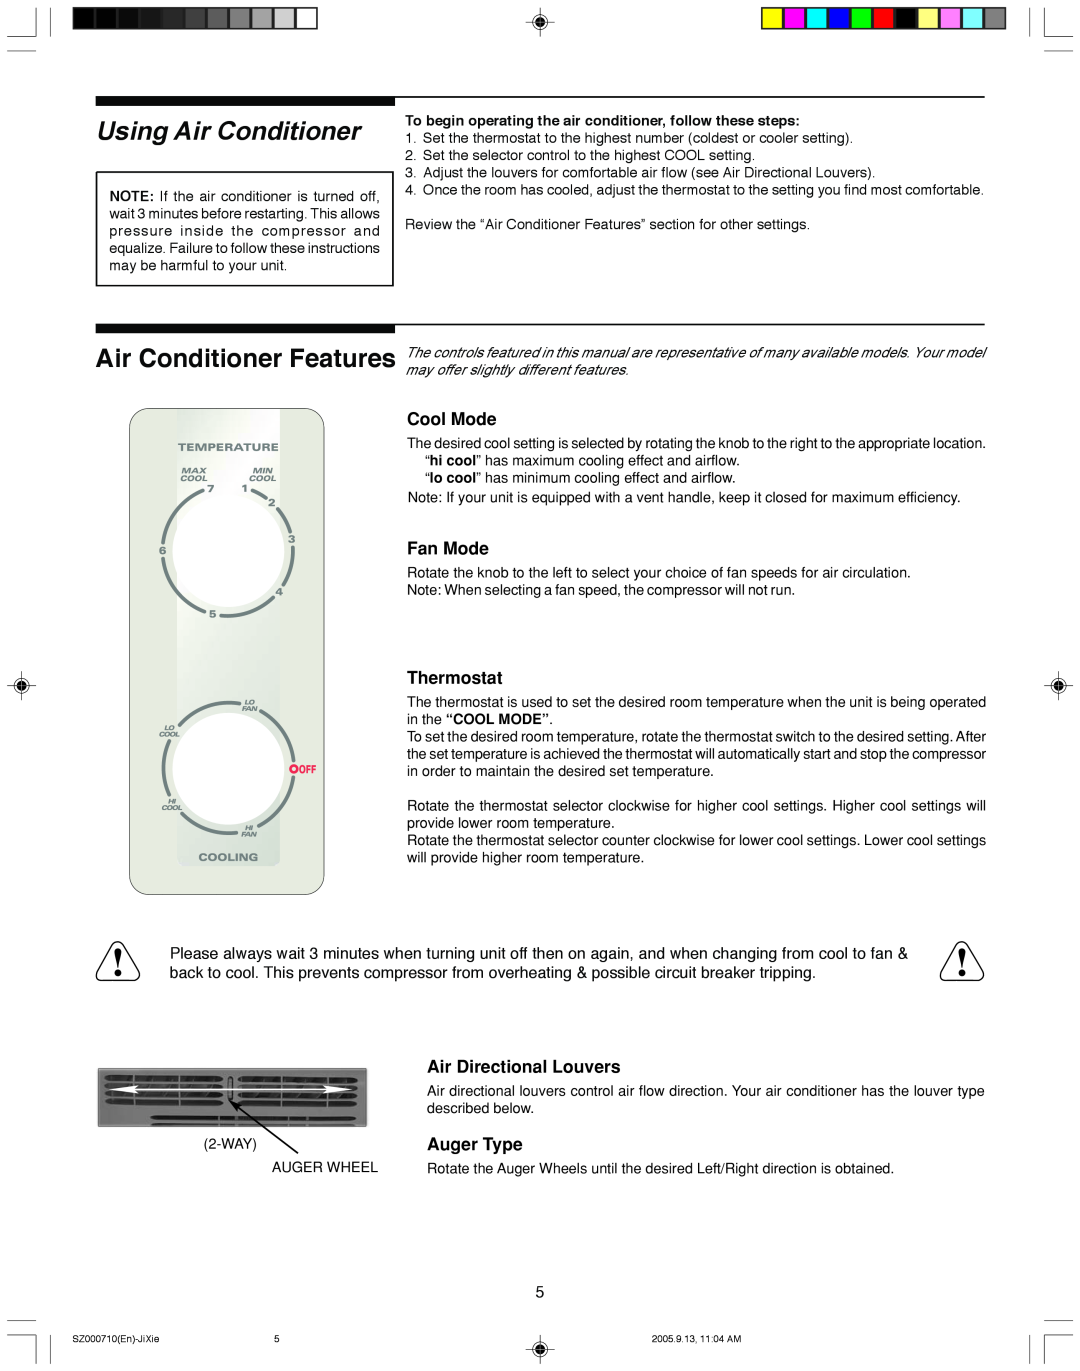 Frigidaire 220211A177 manual Cool Mode, Fan Mode, Thermostat, Air Directional Louvers, Auger Type, Using Air Conditioner 